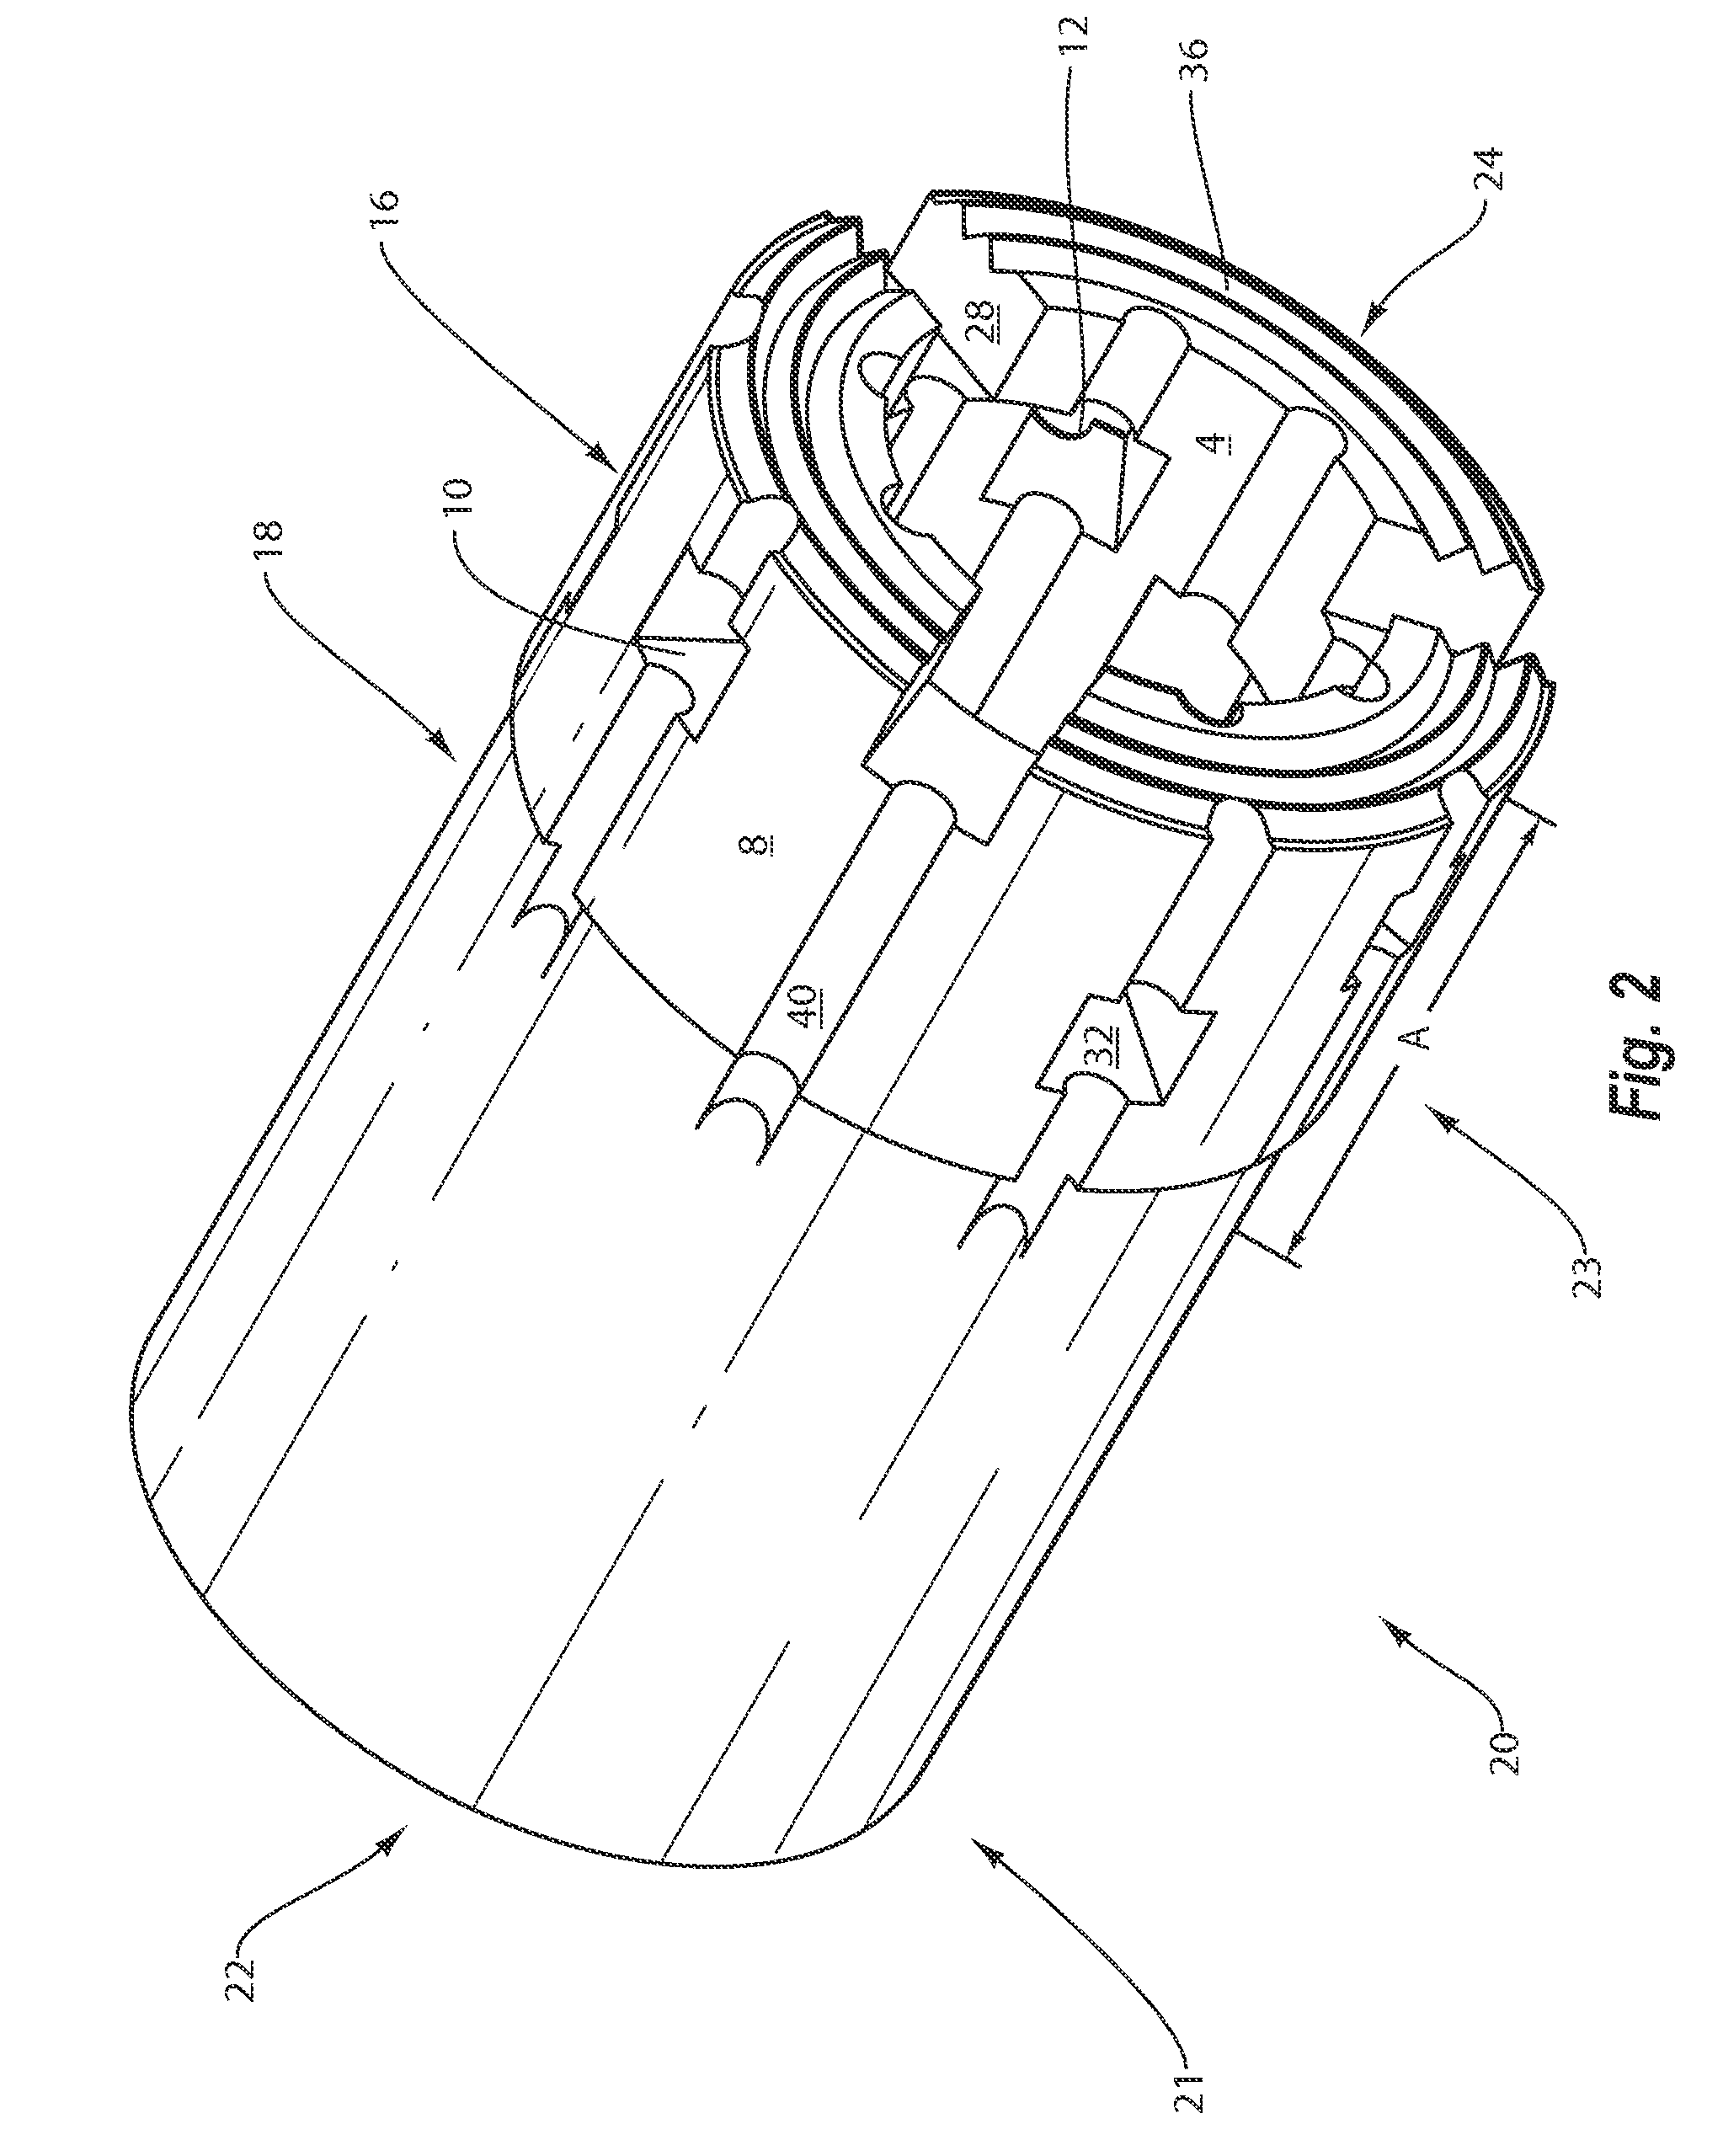 Drill bits with enclosed fluid slots and internal flutes